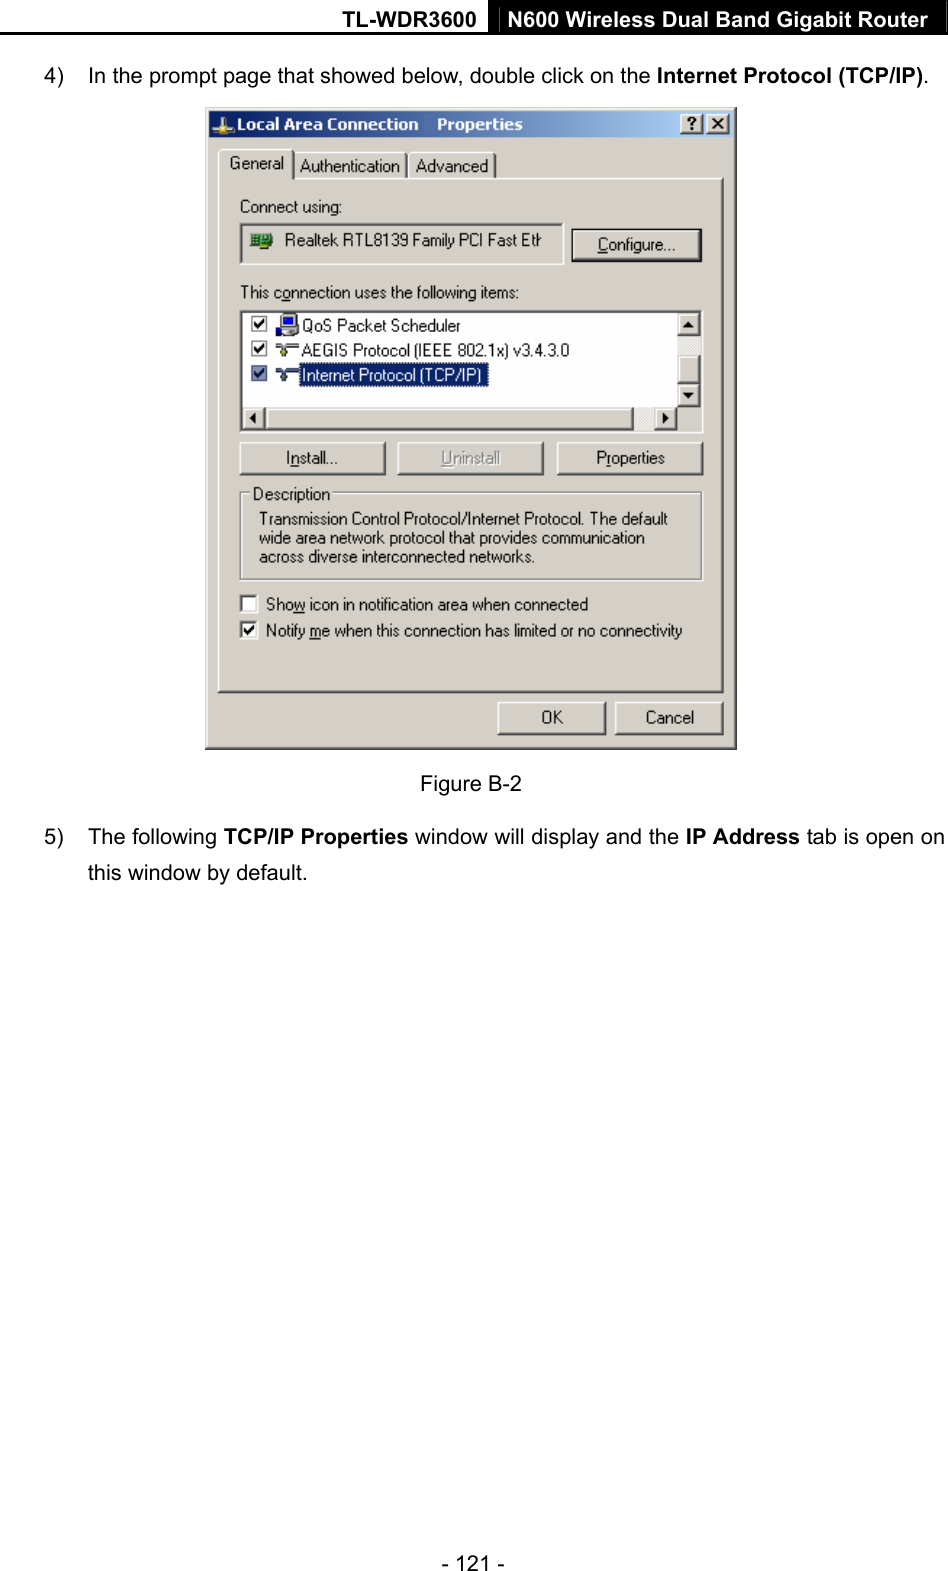 TL-WDR3600 N600 Wireless Dual Band Gigabit Router  - 121 - 4)  In the prompt page that showed below, double click on the Internet Protocol (TCP/IP).  Figure B-2 5) The following TCP/IP Properties window will display and the IP Address tab is open on this window by default. 